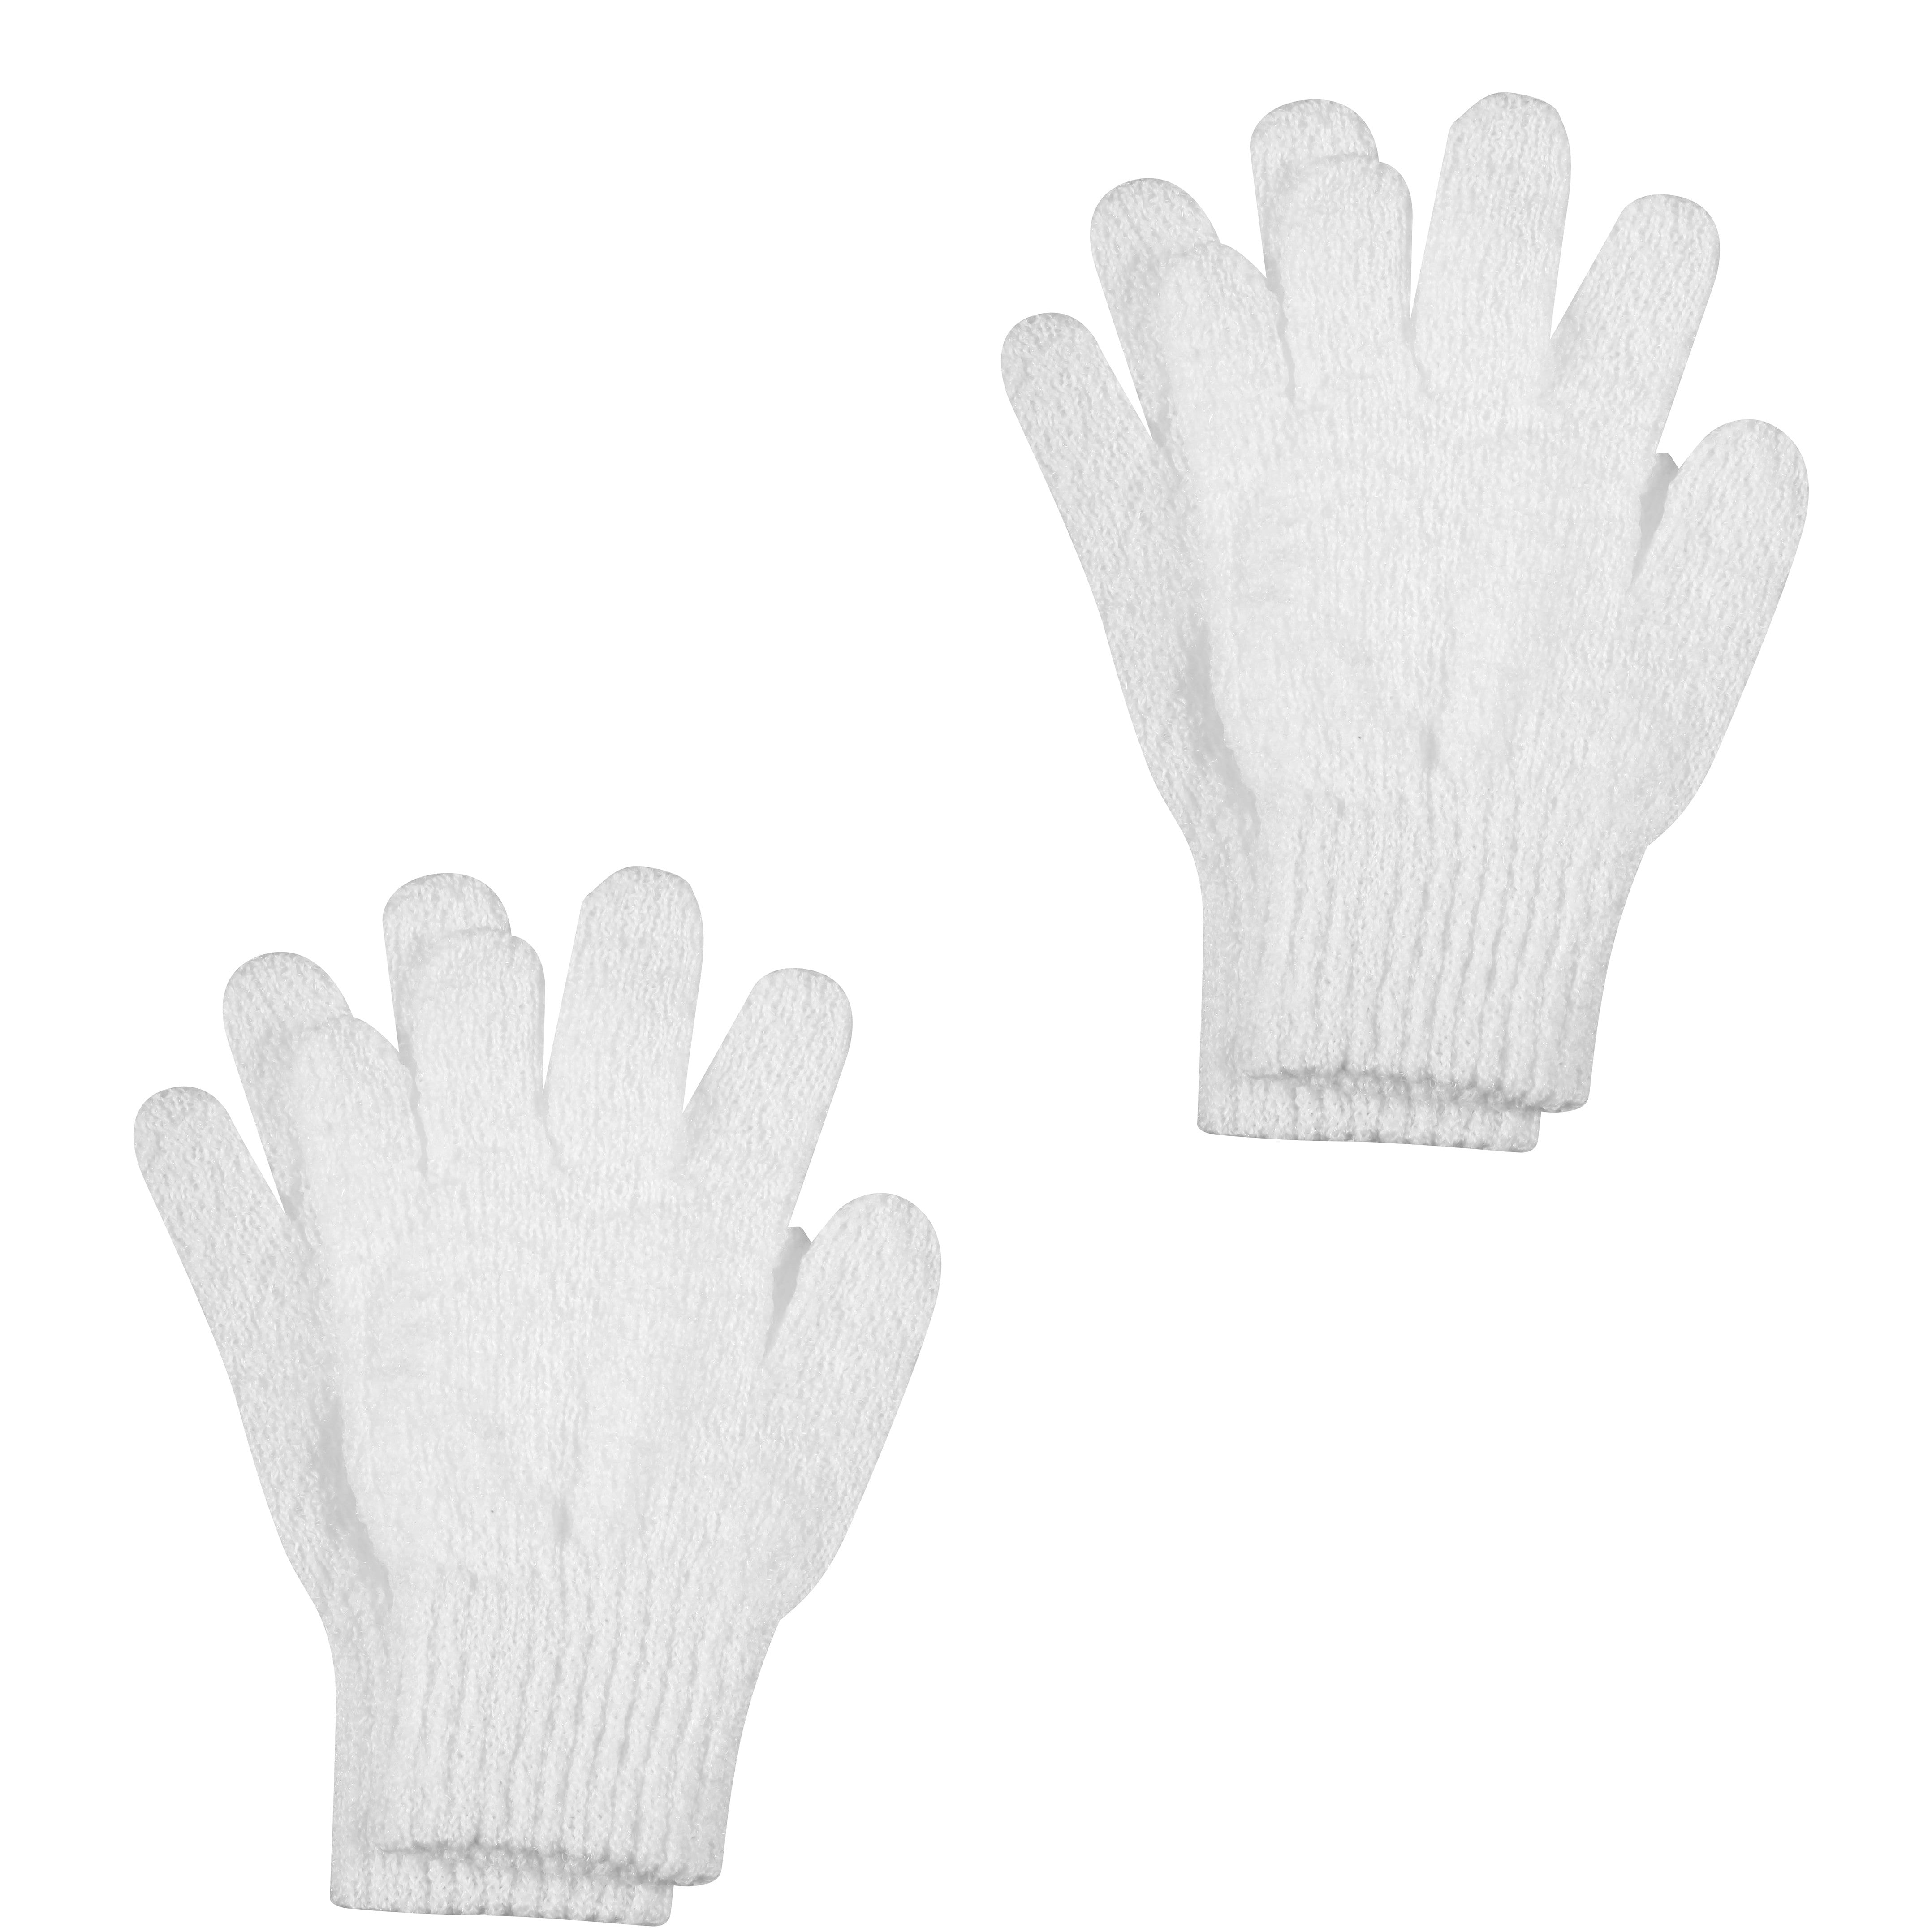 After Spa Exfoliating Bath Gloves, 2 Pairs